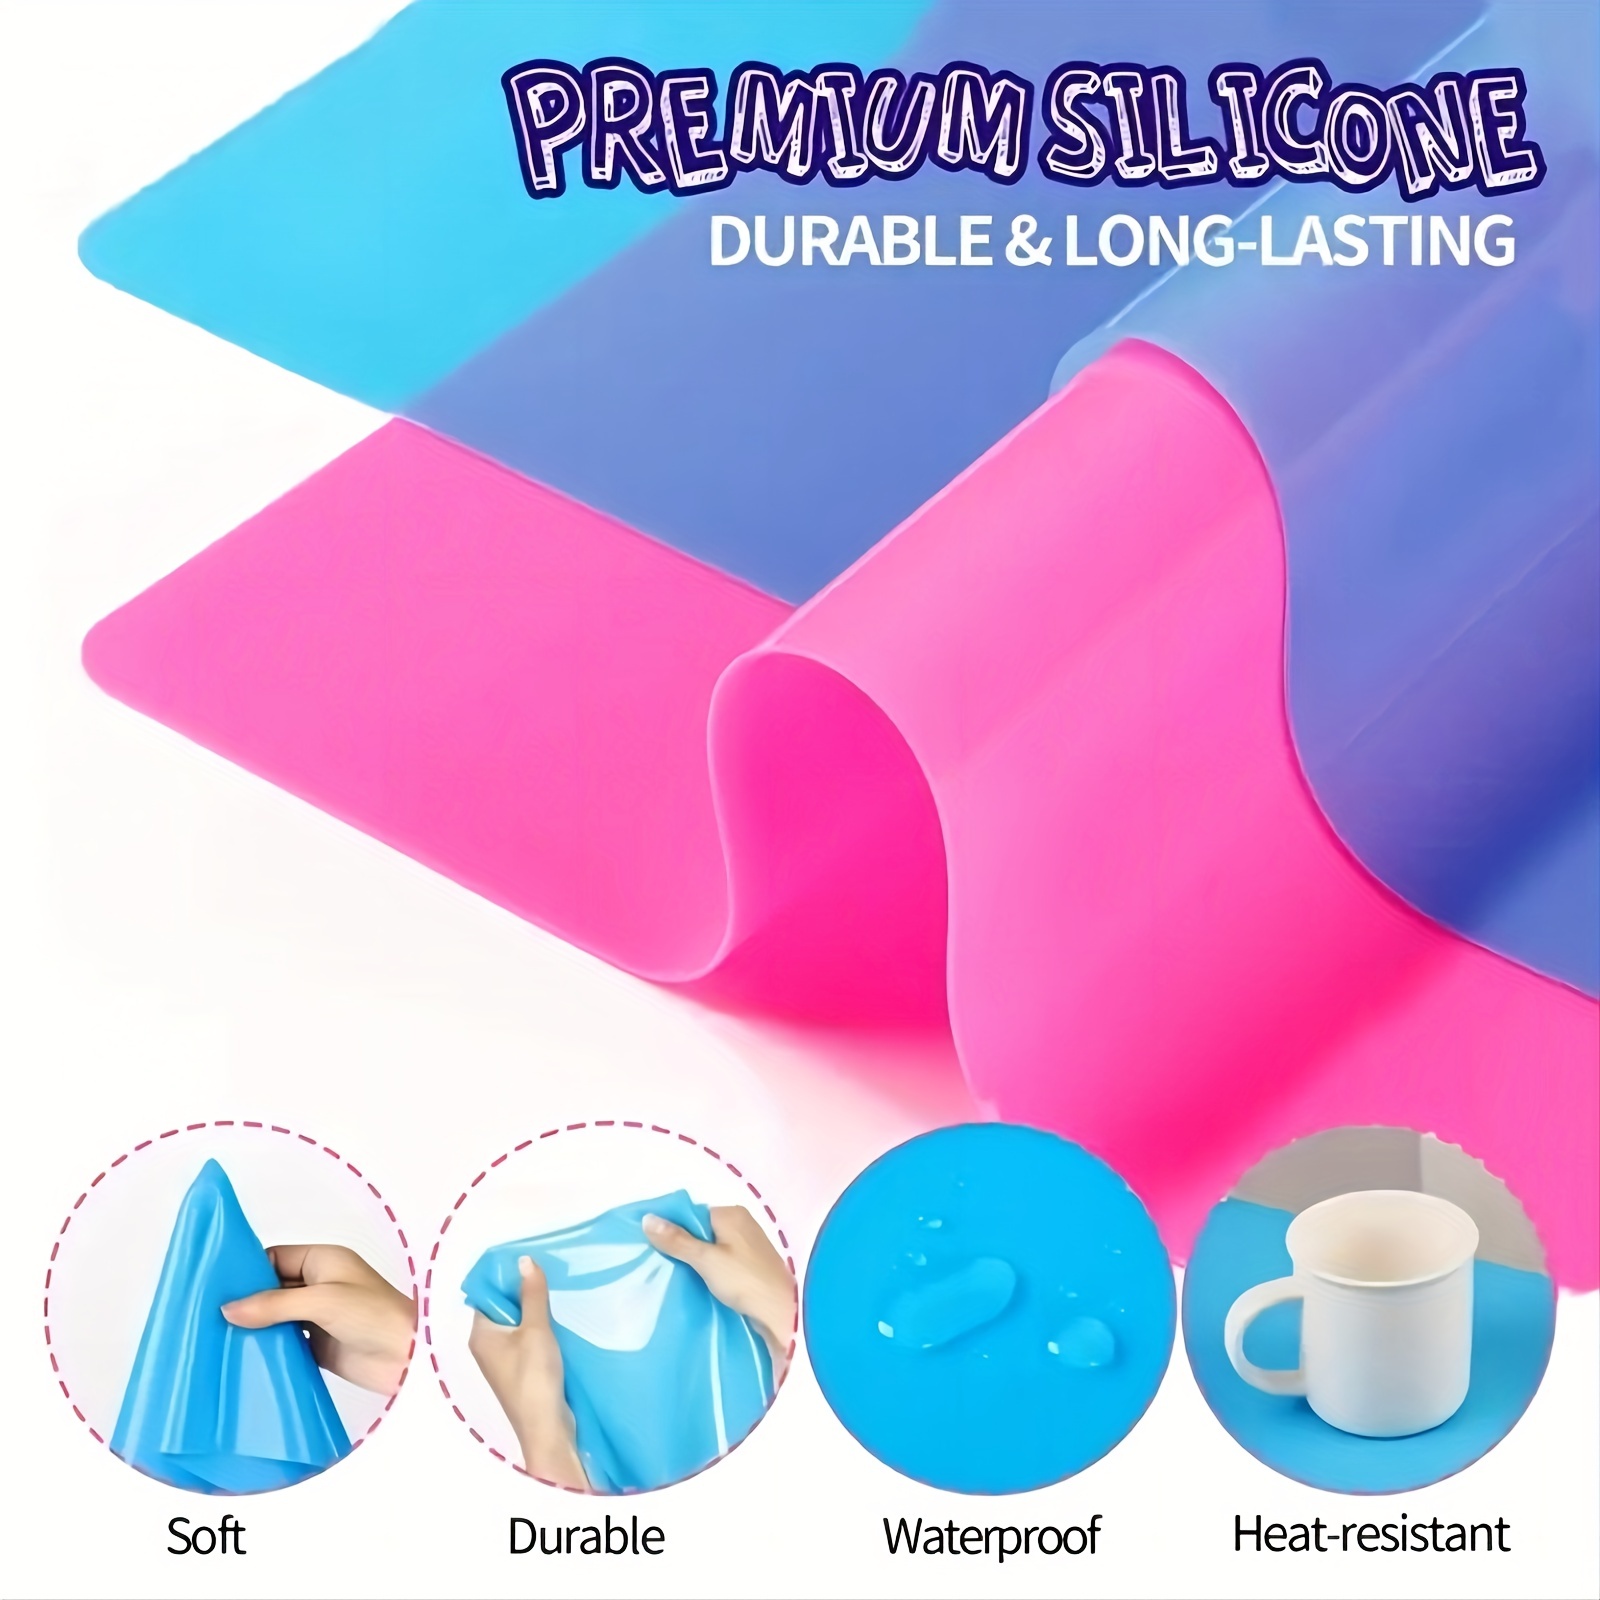 Silicone Craft Mat Silicone Mat For Resin Casting Painting DIY Cr Clay xp  N5I7 